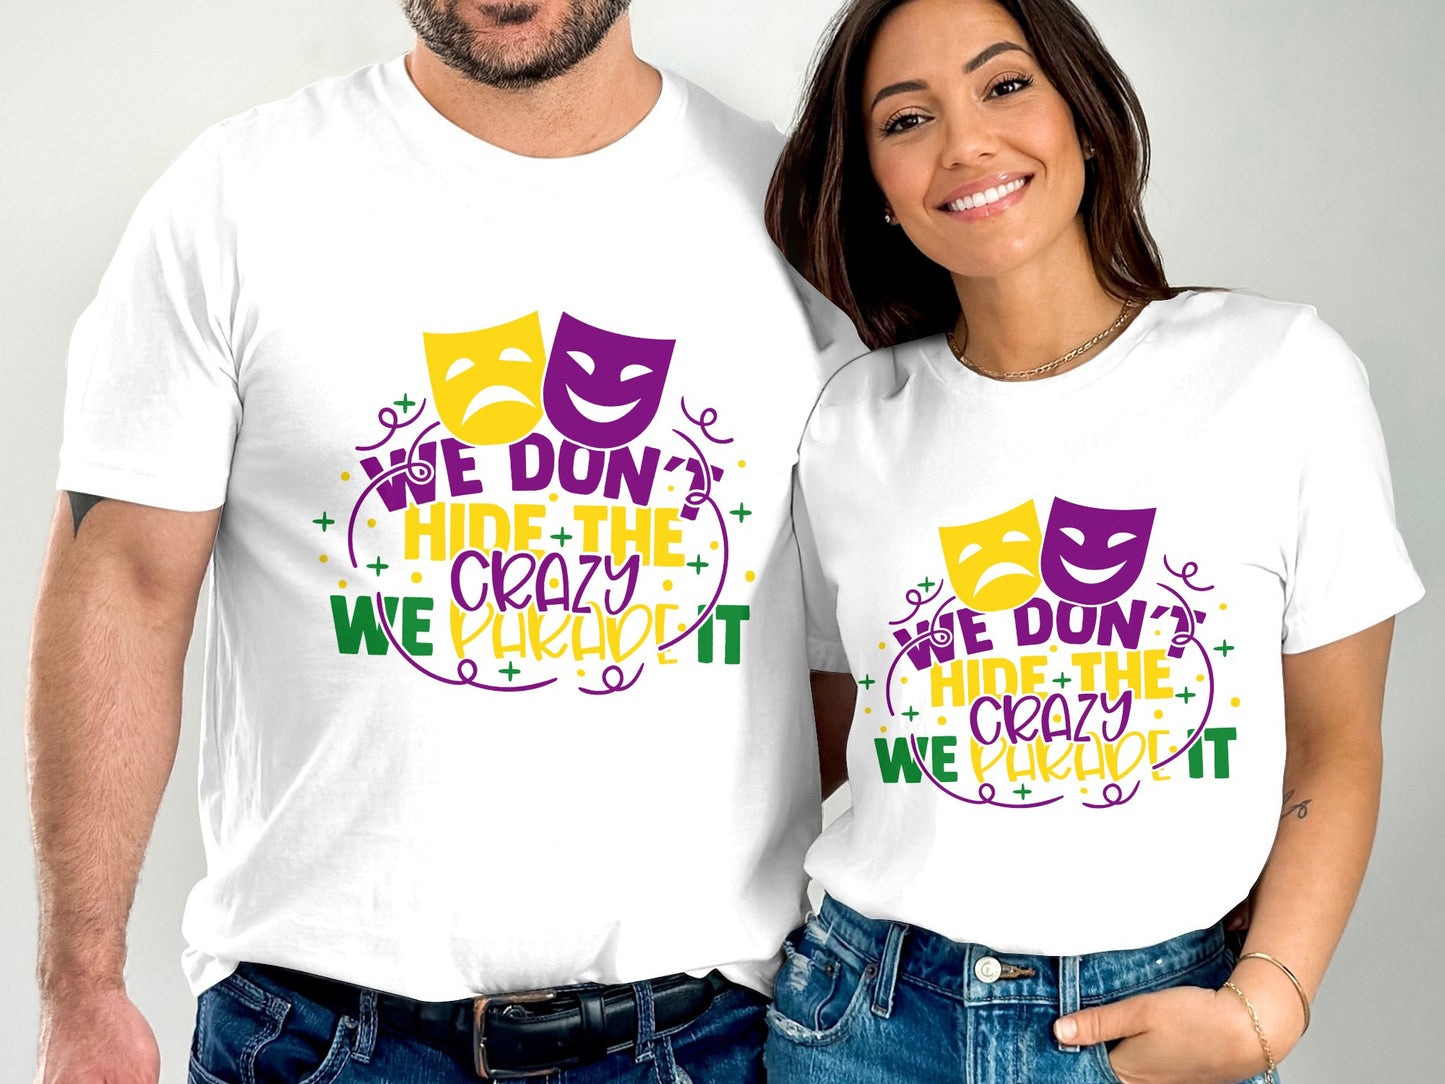 We don't hide the crazy we Parade it T-shirt